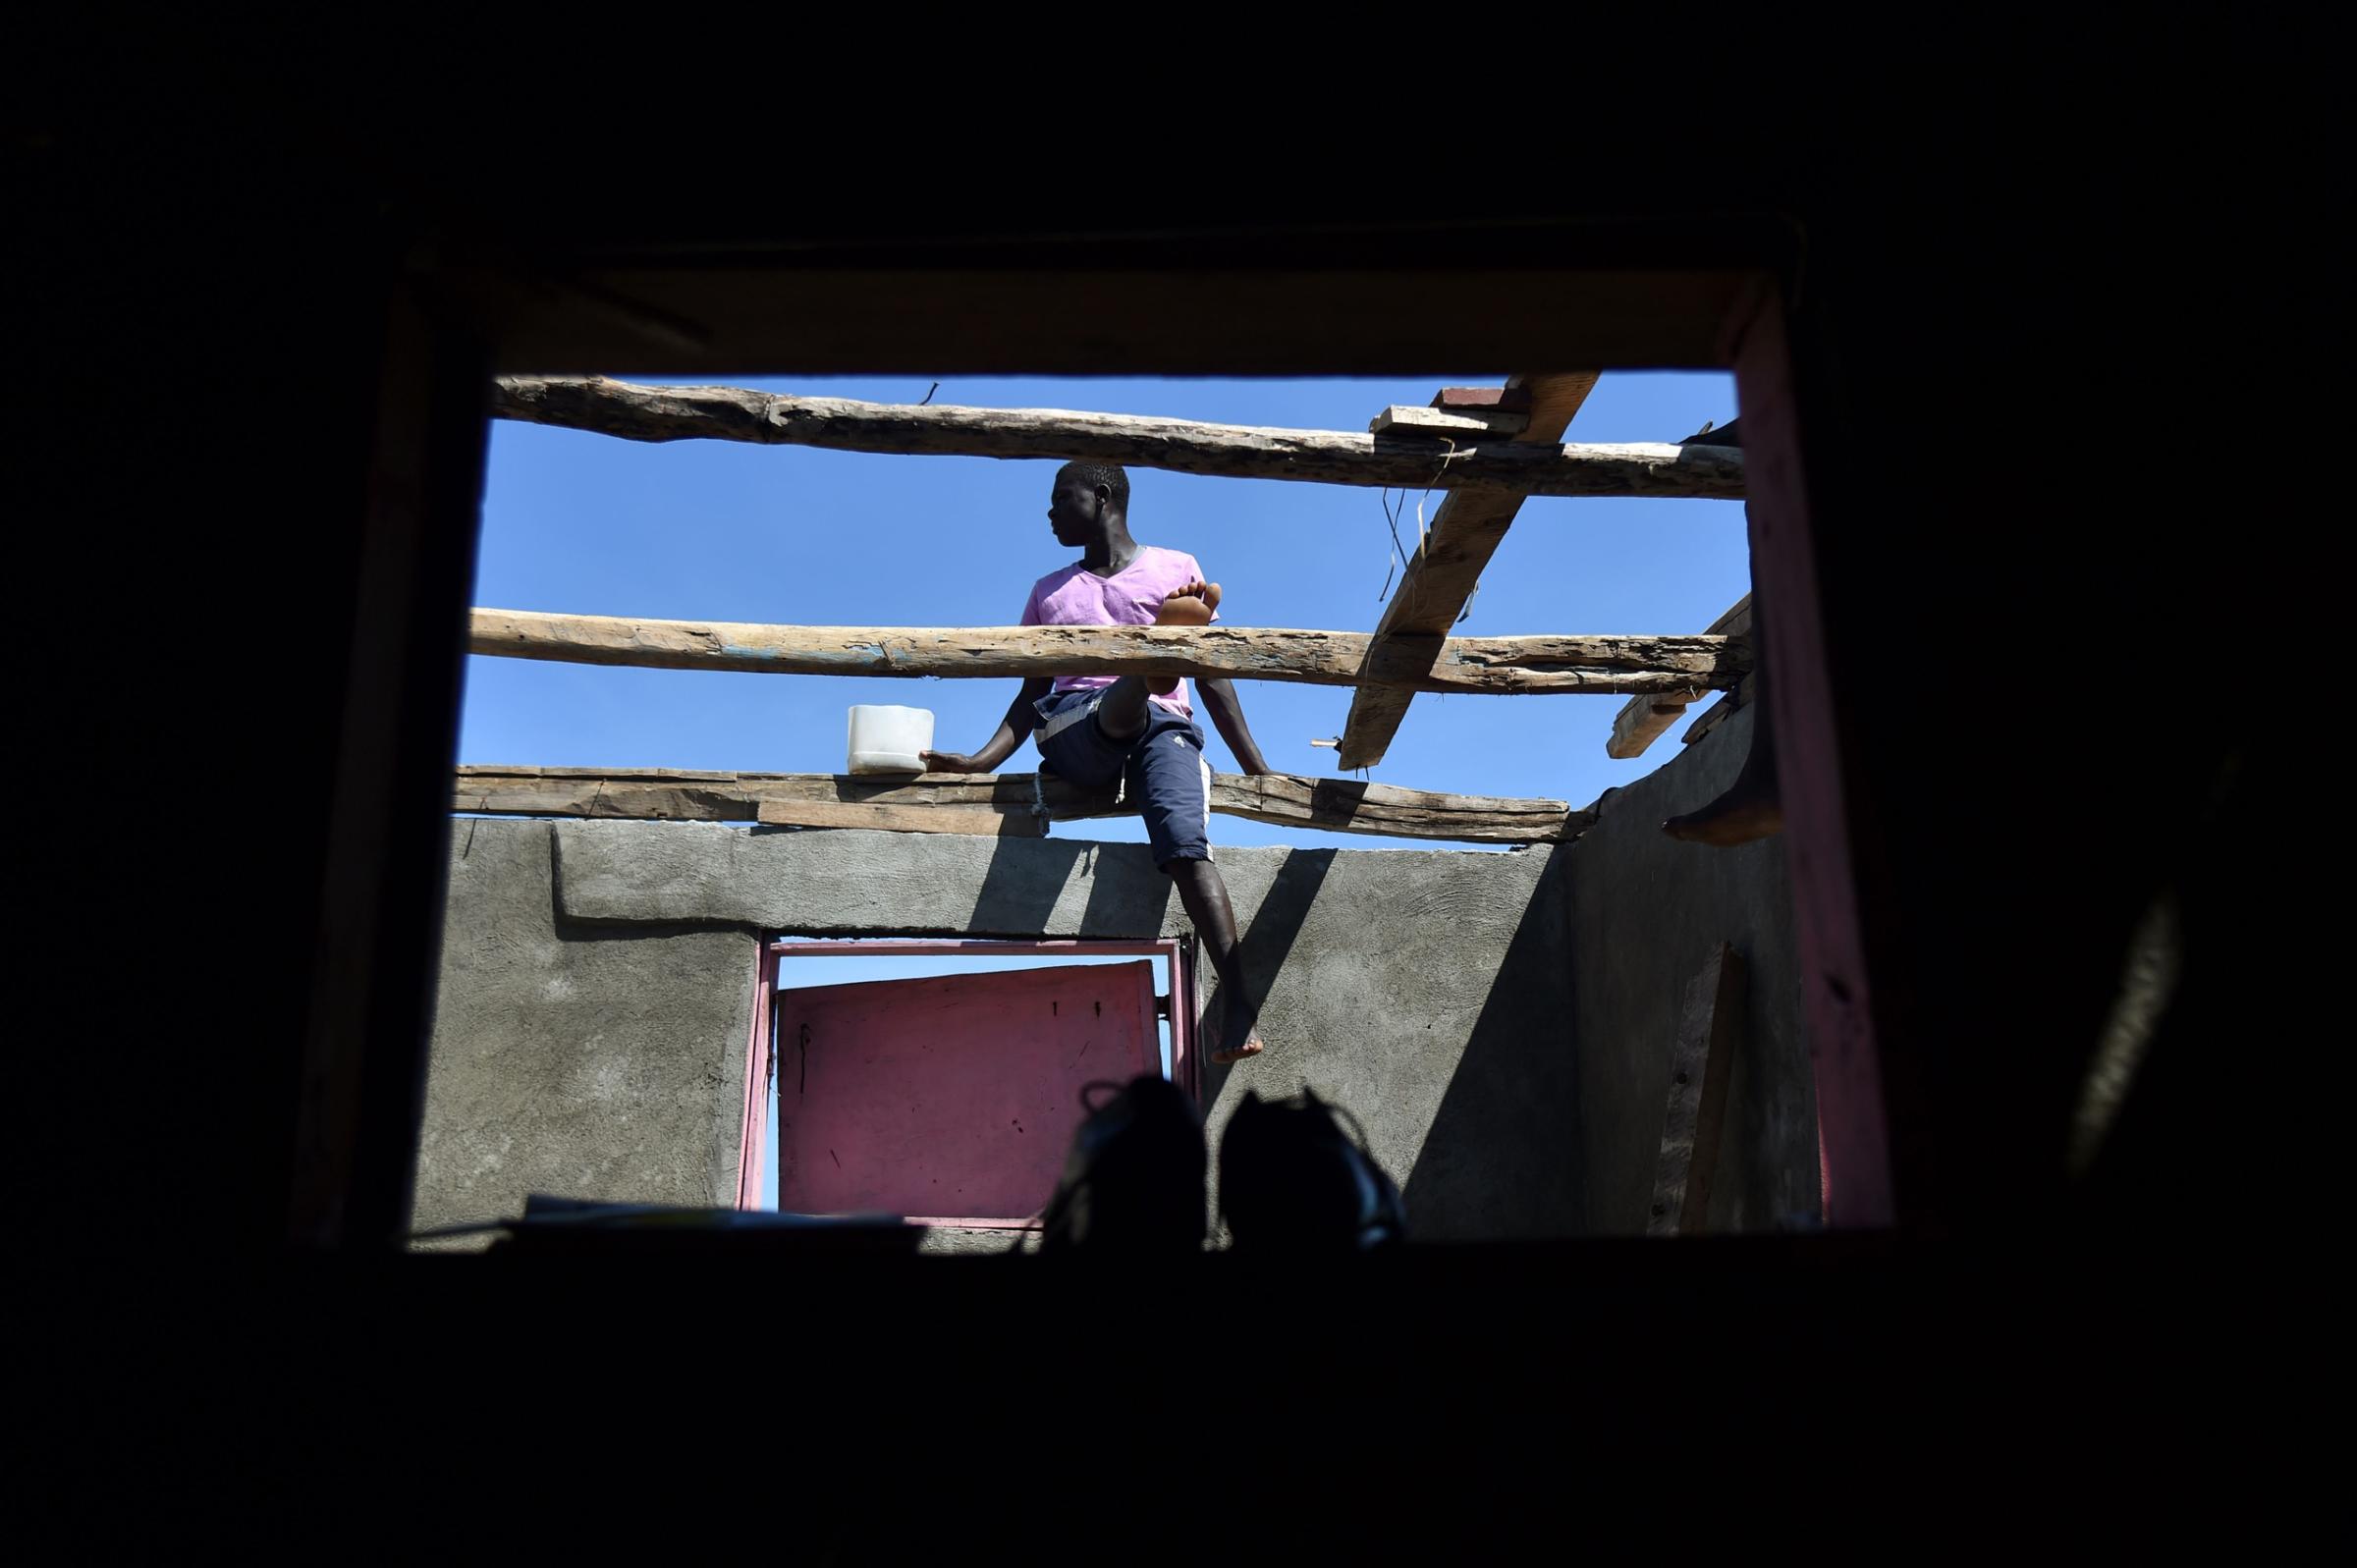 Members of a family repair their home damaged by Hurricane Matthew in Gomier, Haiti, on October 8, 2016. The full scale of the devastation in hurricane-hit rural Haiti became clear as the death toll surged over 400, three days after Hurricane Matthew leveled huge swaths of the country's south. / AFP PHOTO / HECTOR RETAMALHECTOR RETAMAL/AFP/Getty Images